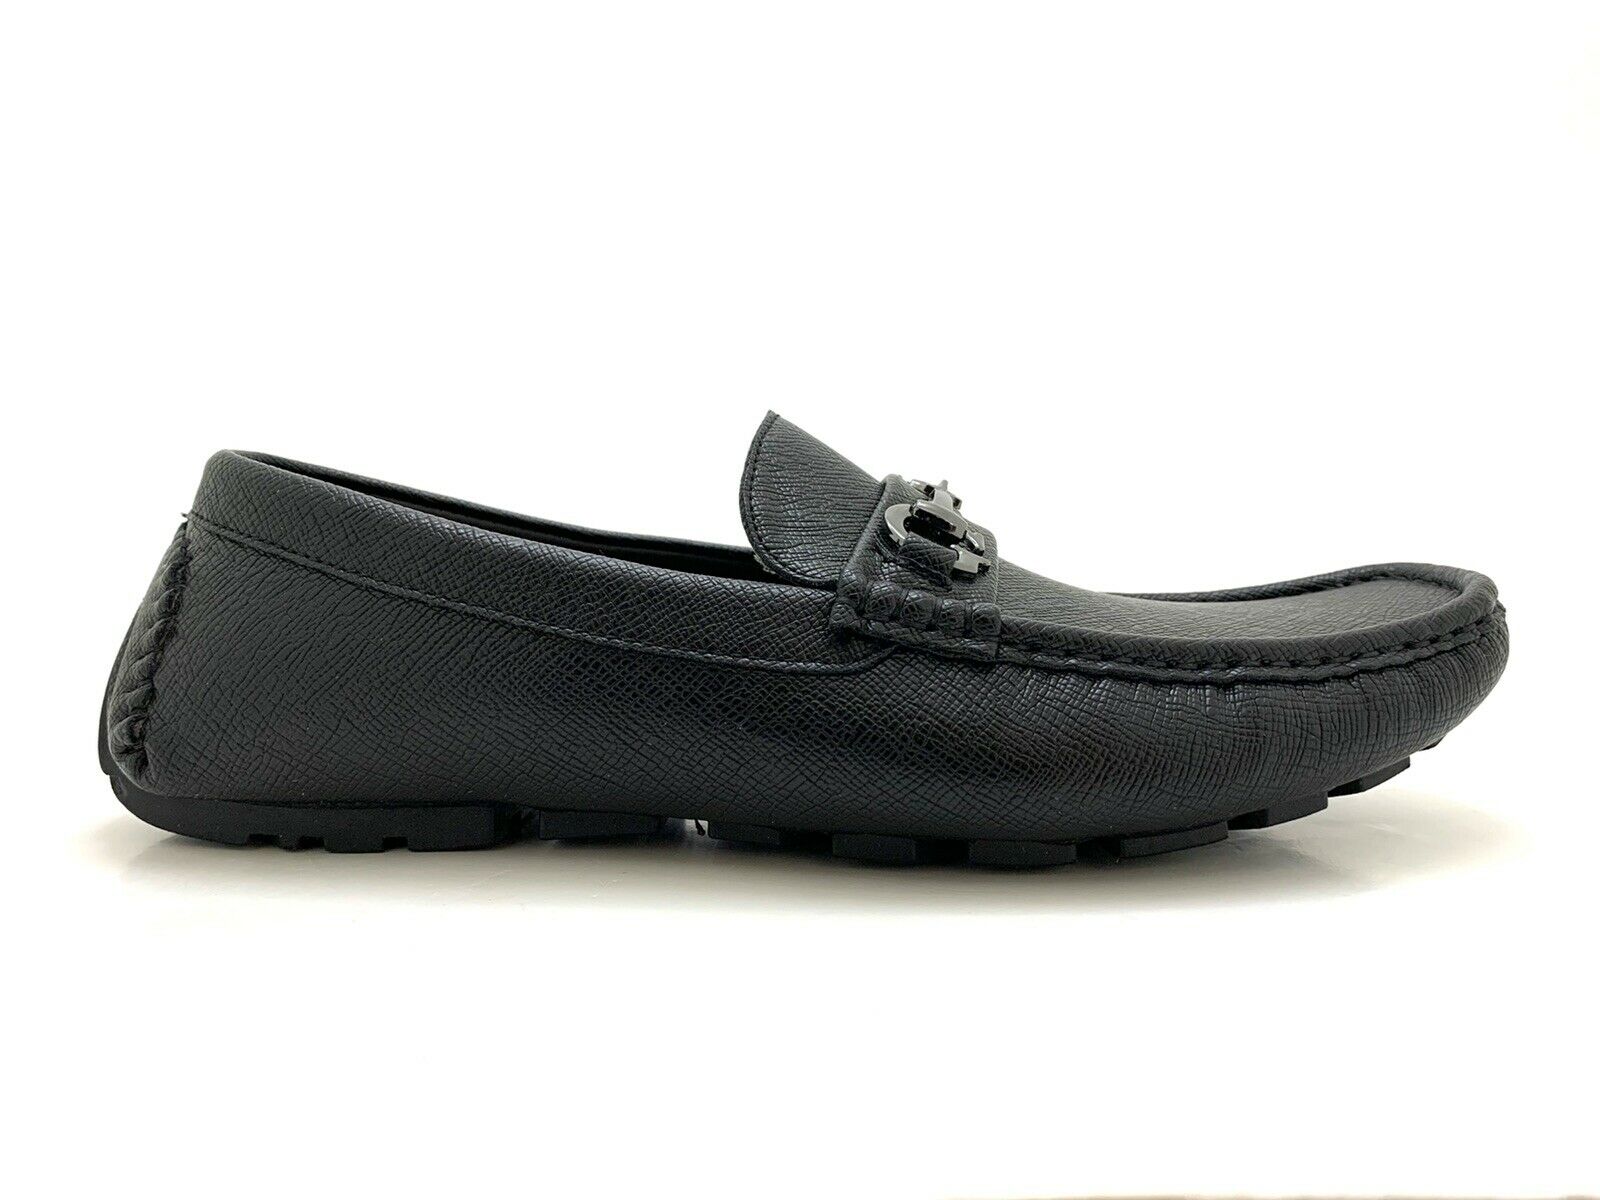 Guess Men's Adlers Slip On Driving Style Loafer Shoes Black Textured Size 8 Med